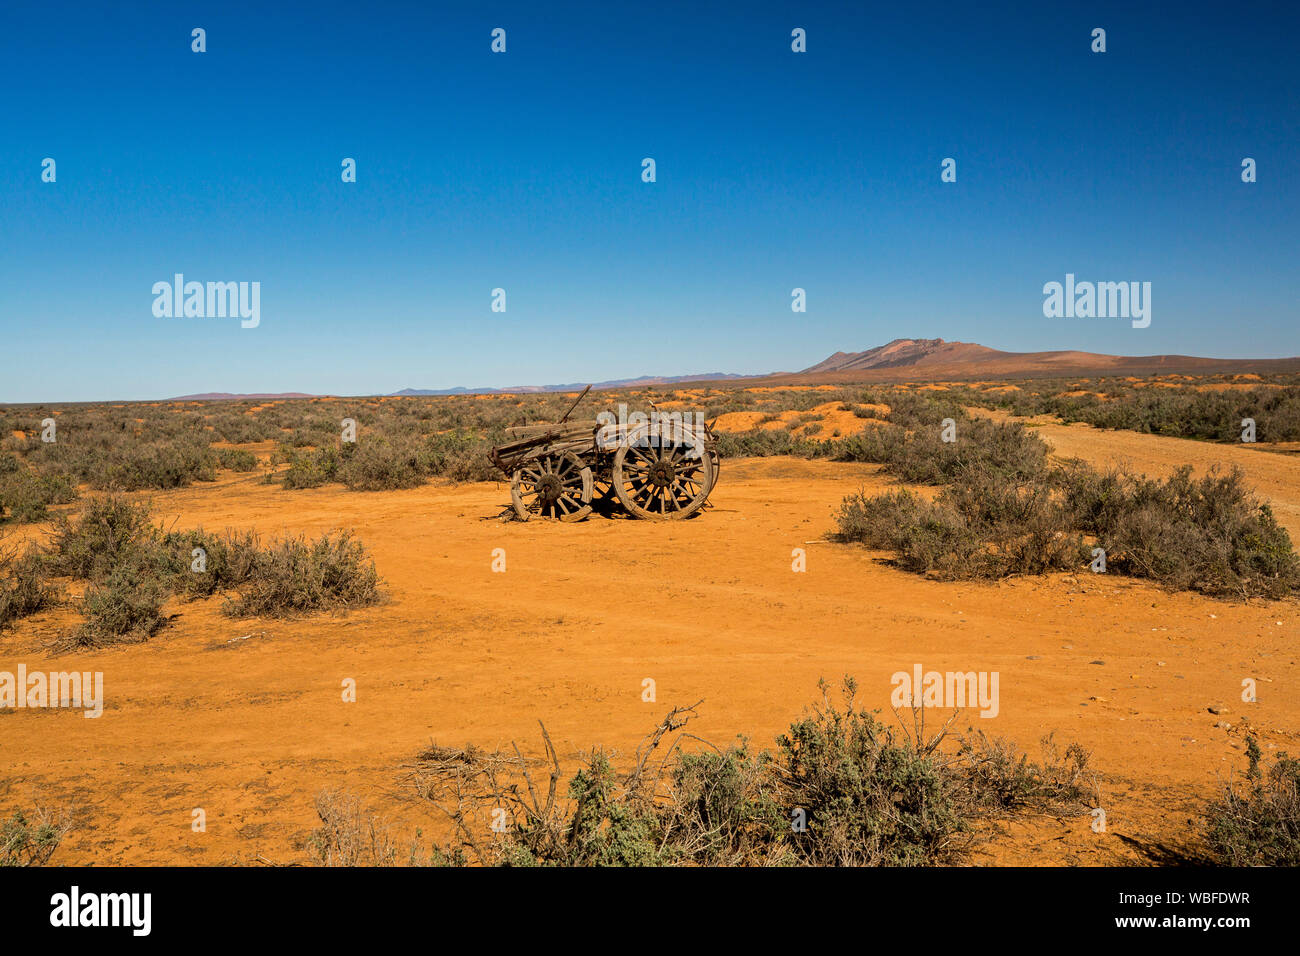 Old horse drawn farm wagon abandoned in remote and arid outback landscape with red soil and low vegetation on plains under blue sky in South Australia Stock Photo